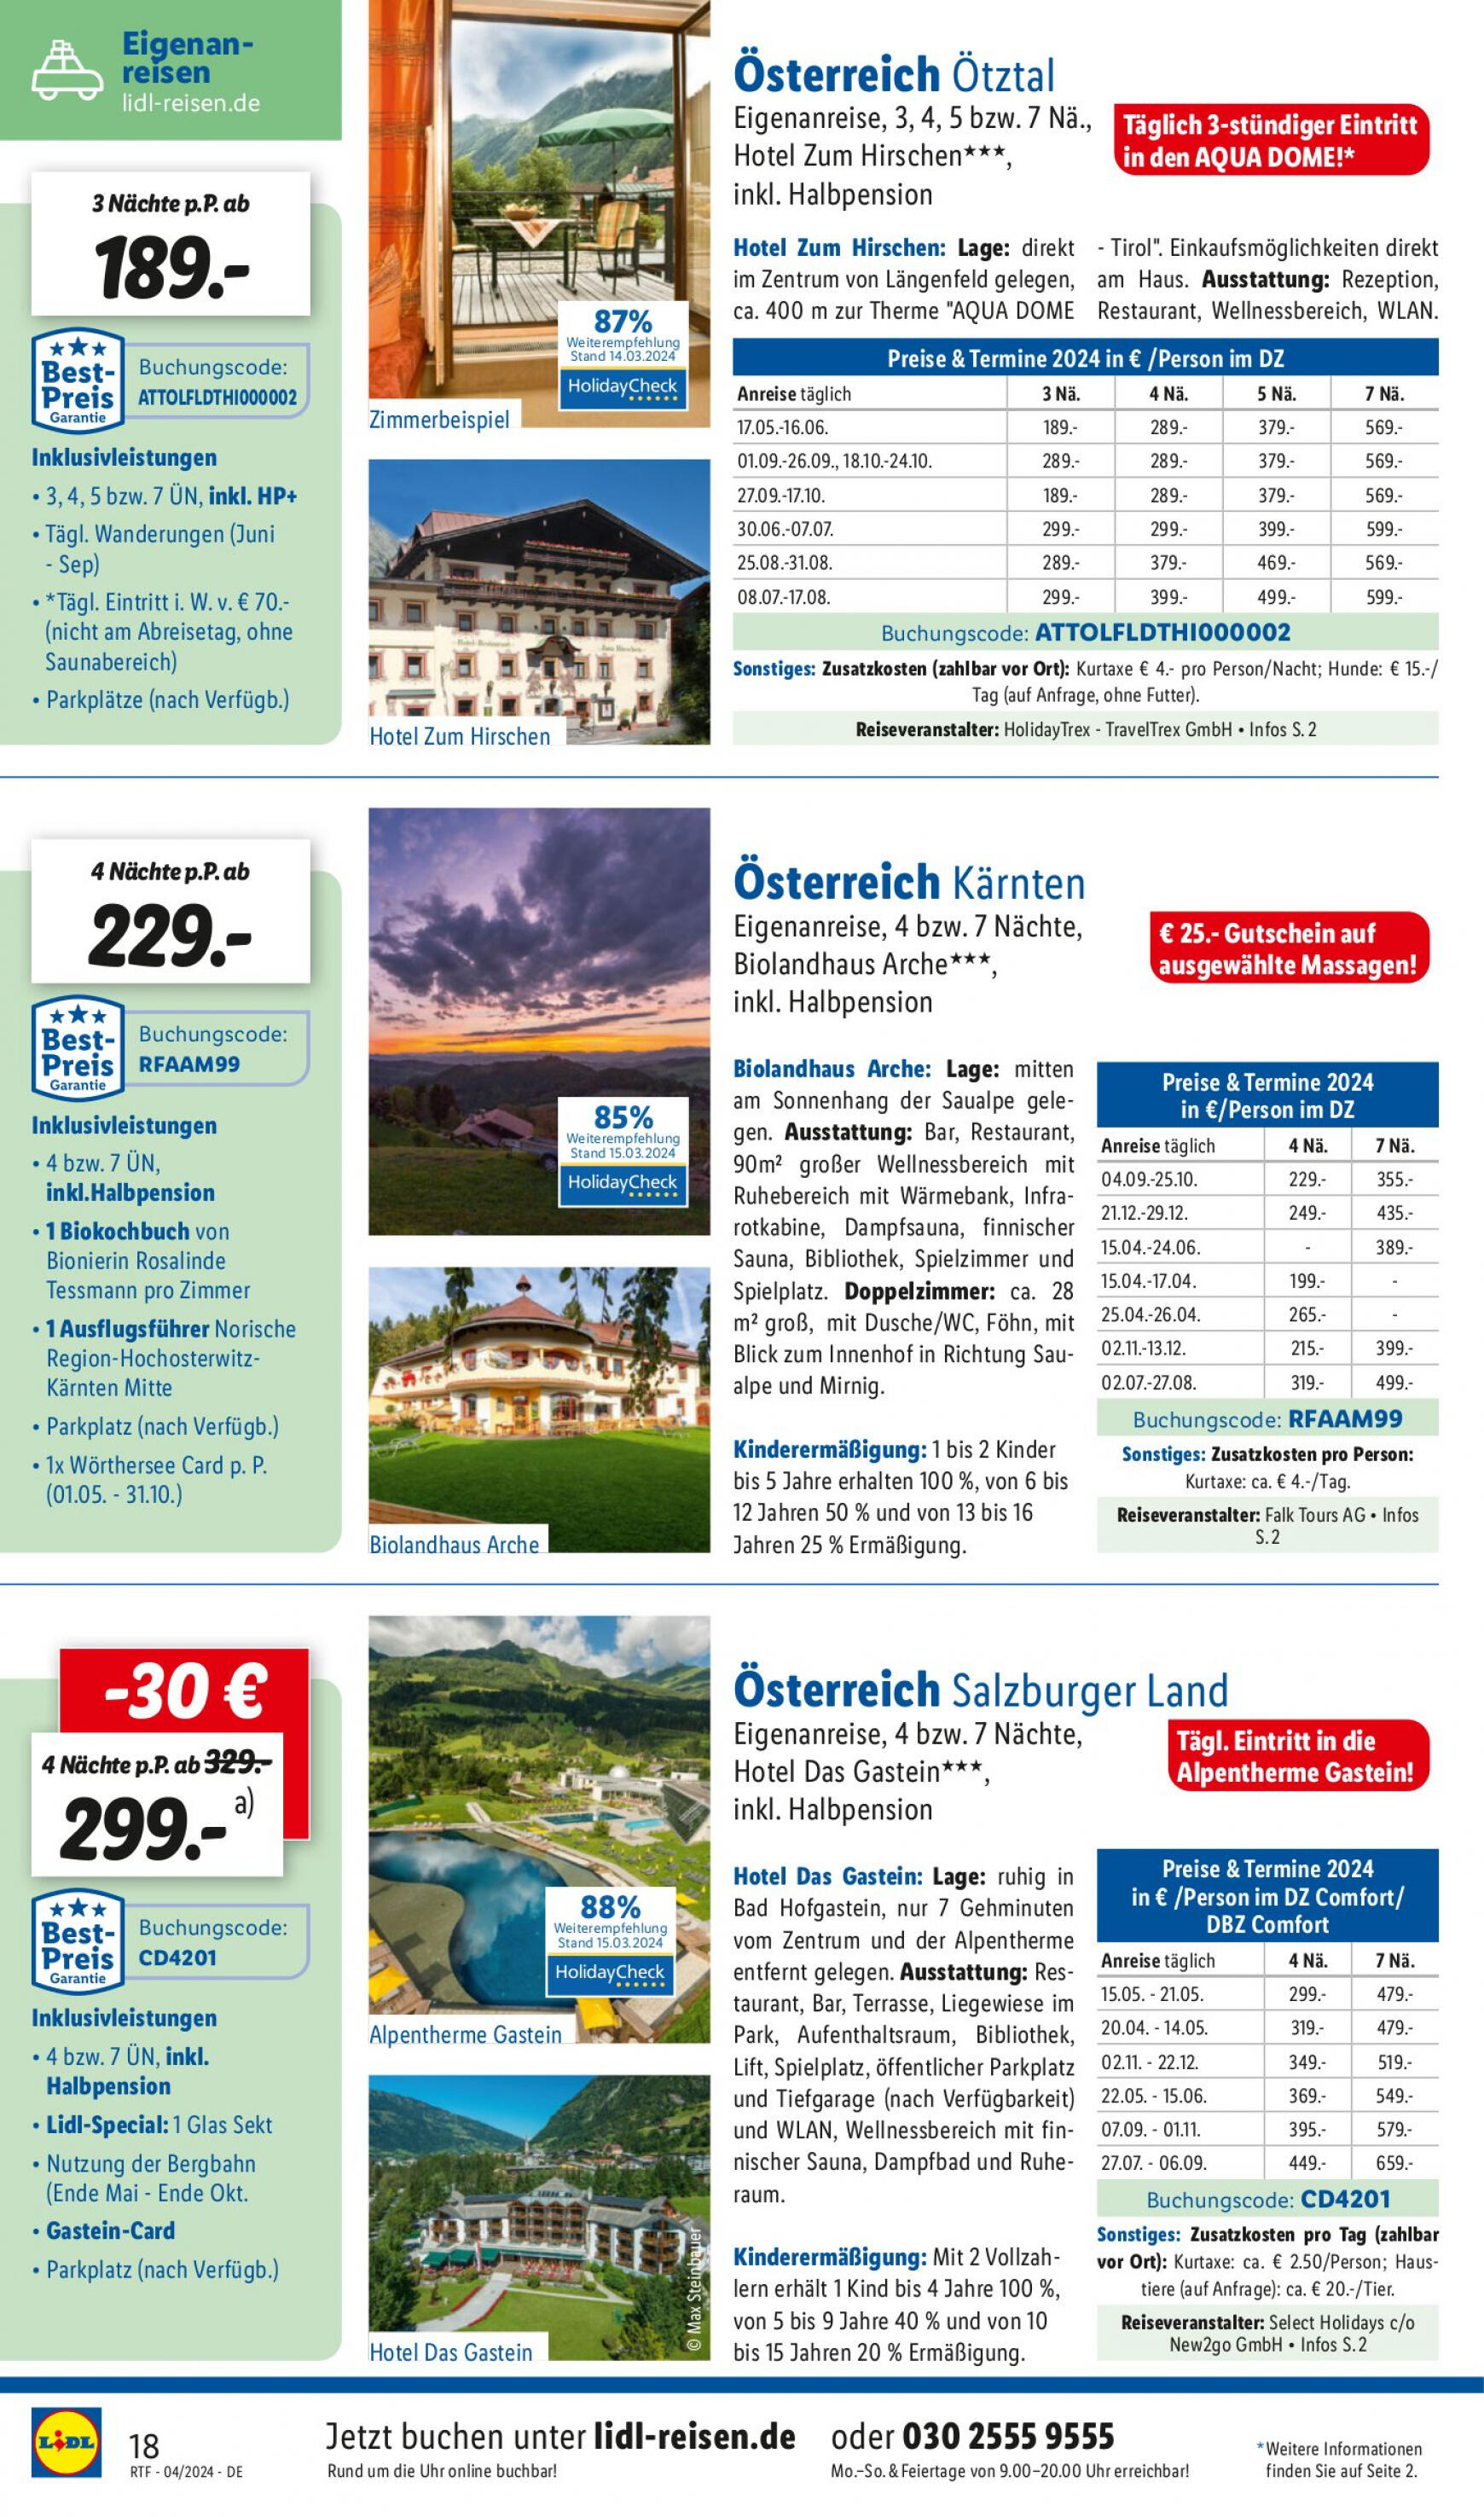 lidl - Flyer Lidl - Sommerschnäppchen aktuell 13.04. - 15.05. - page: 18